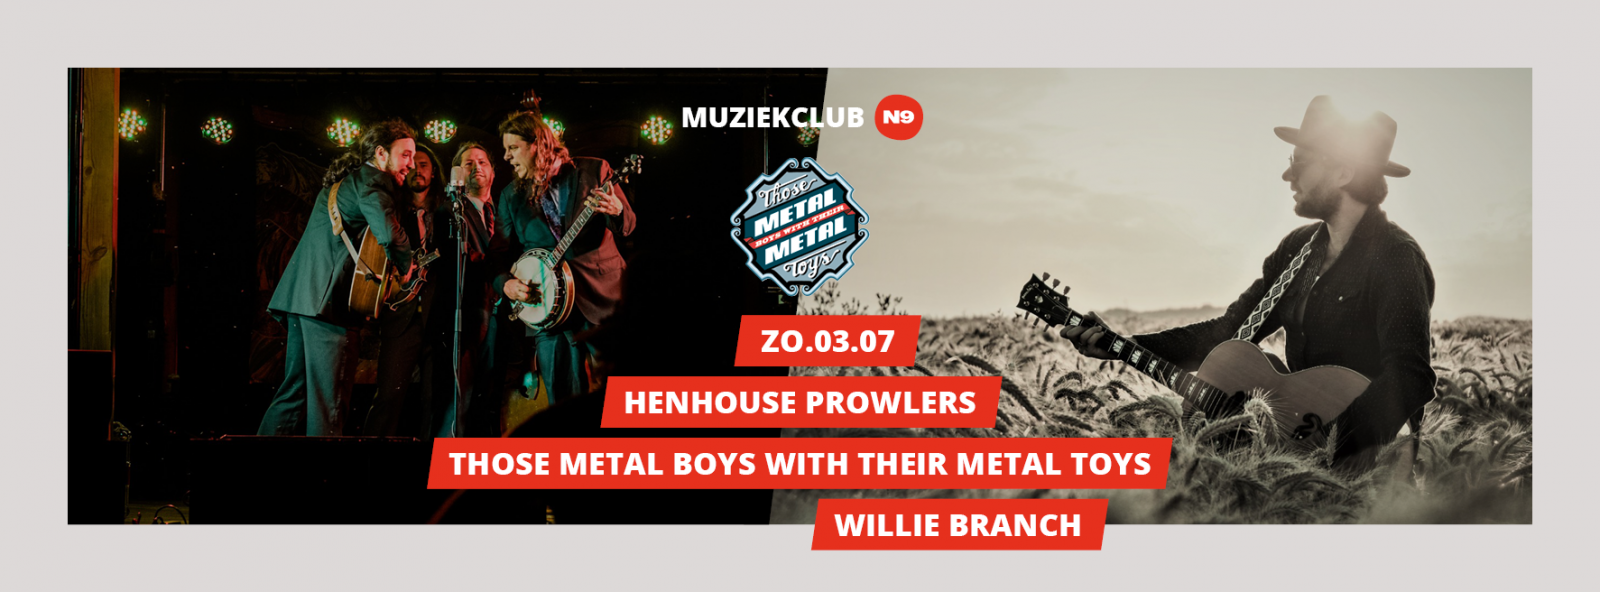 Henhouse Prowlers + Those Metal Boys + Willie Branch